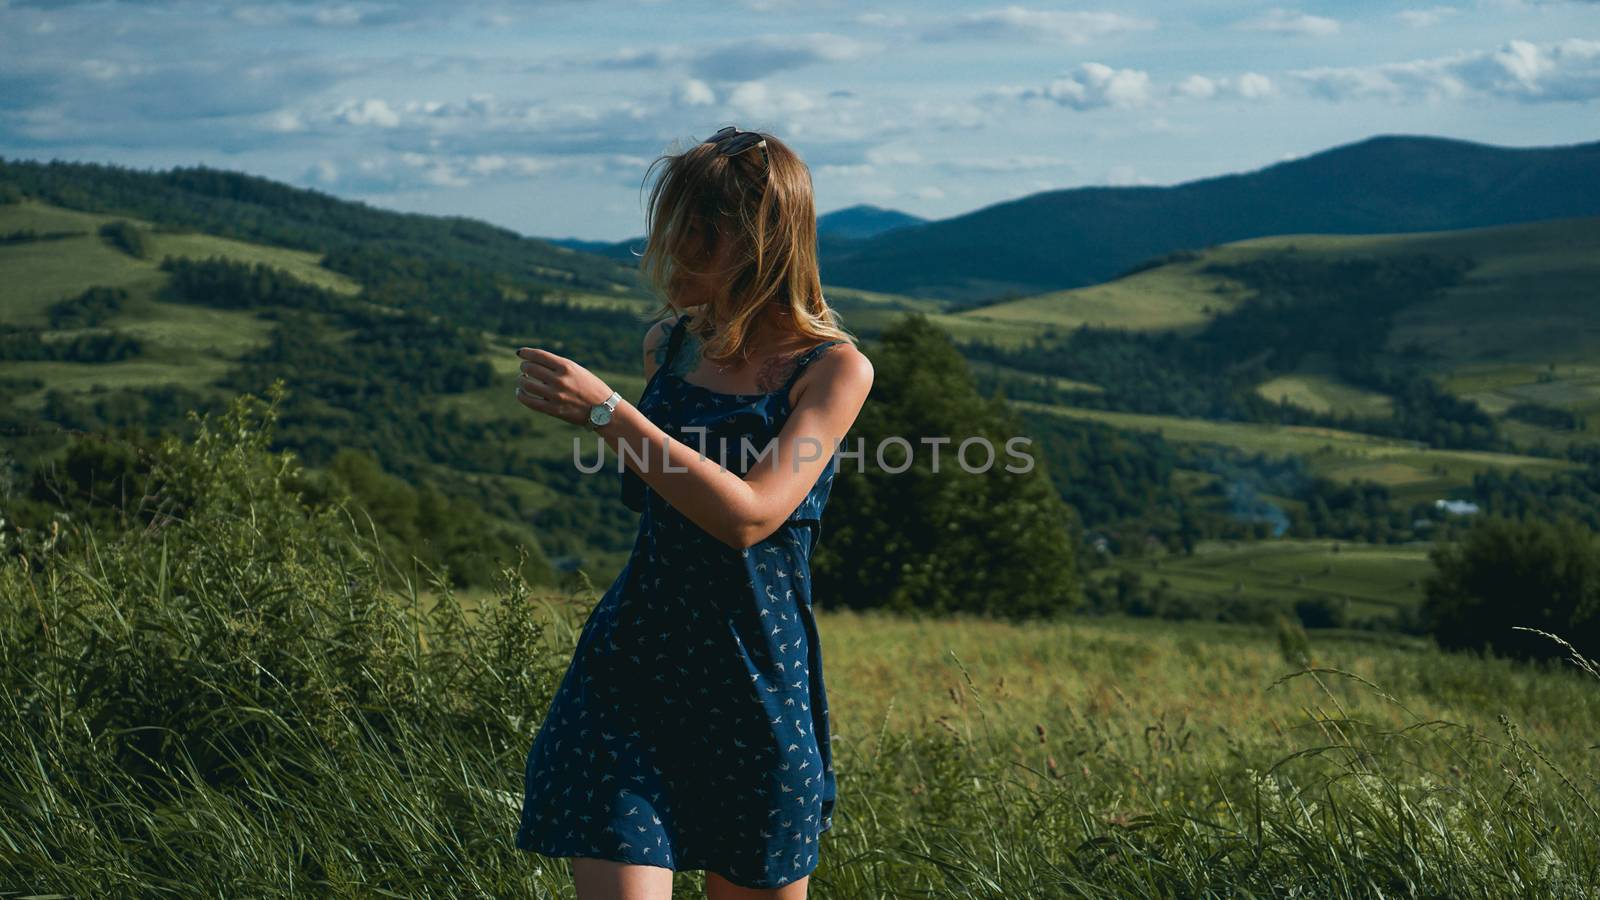 Happy Woman in mountains at sunny day time by natali_brill